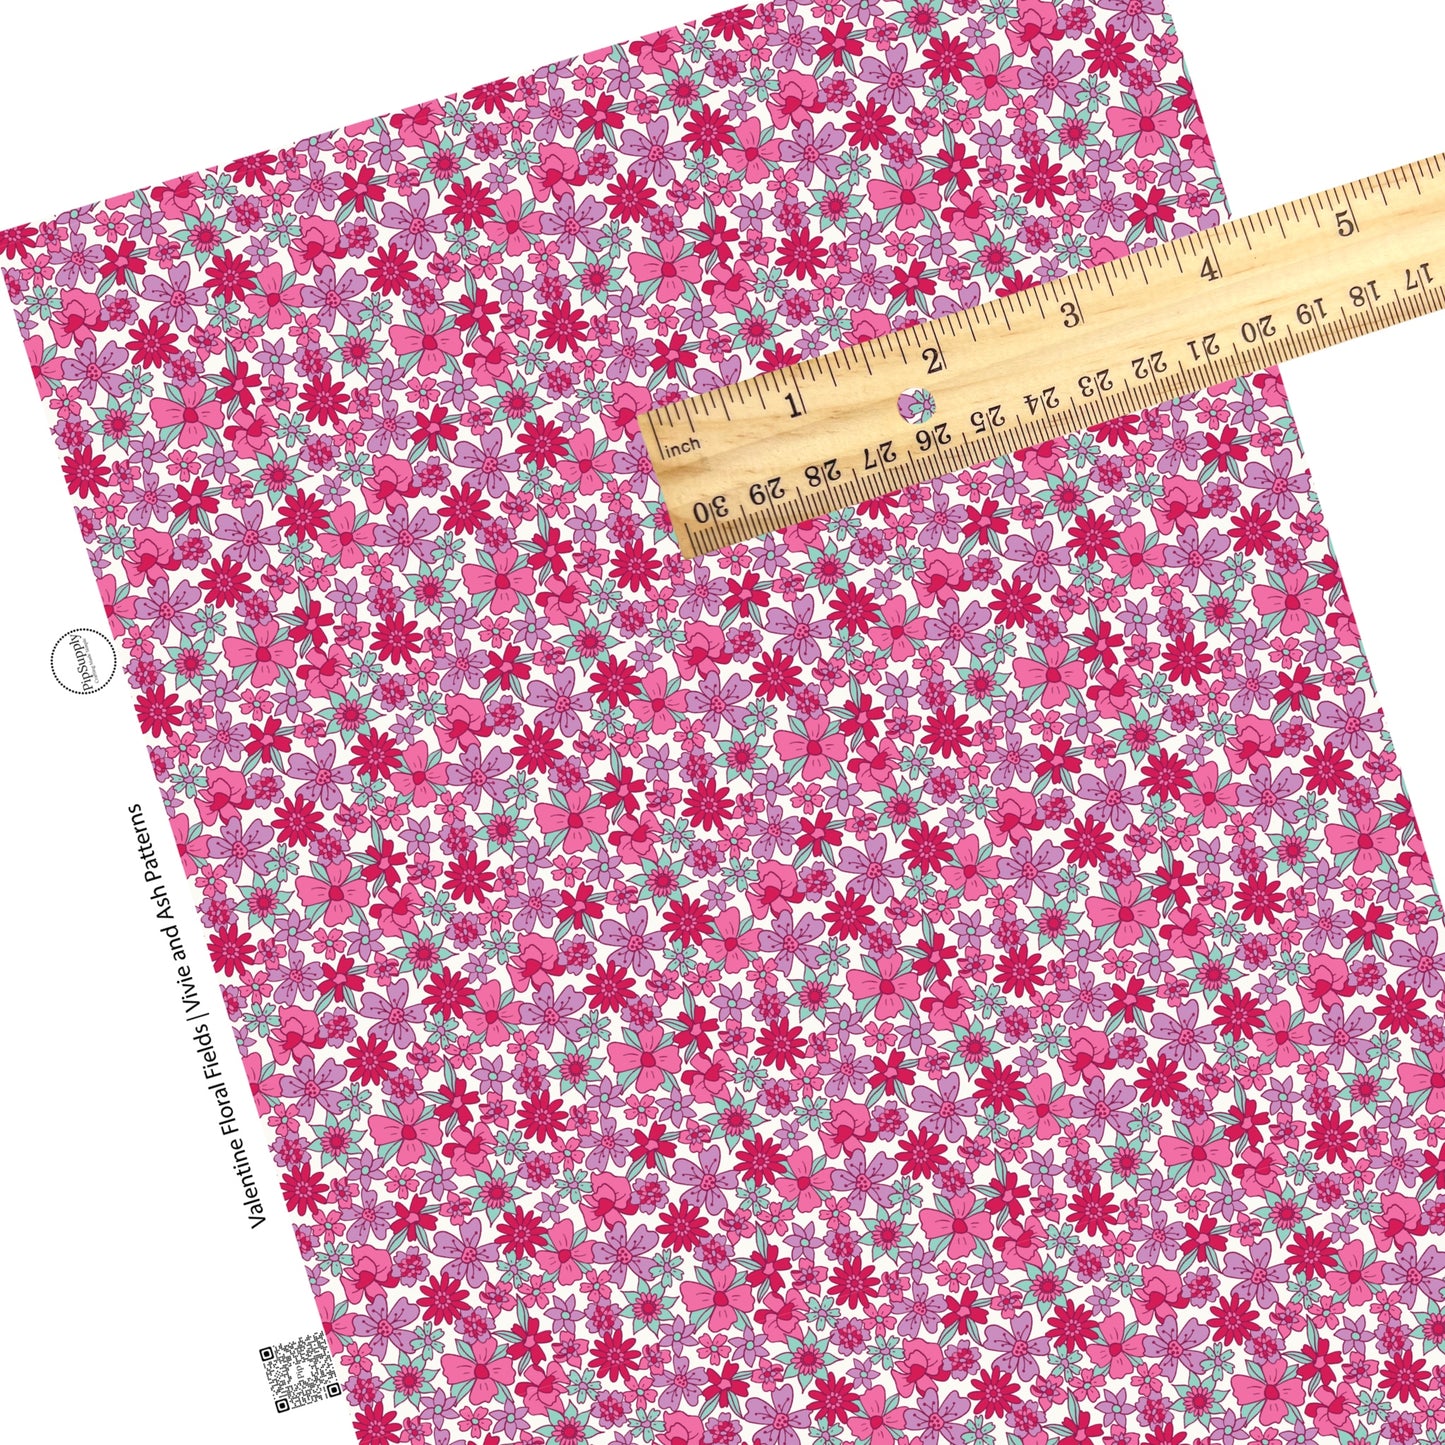 These Valentine's Day pattern faux leather sheets contain the following design elements: pink, purple, red, and mint flowers on white. Our CPSIA compliant faux leather sheets or rolls can be used for all types of crafting projects.